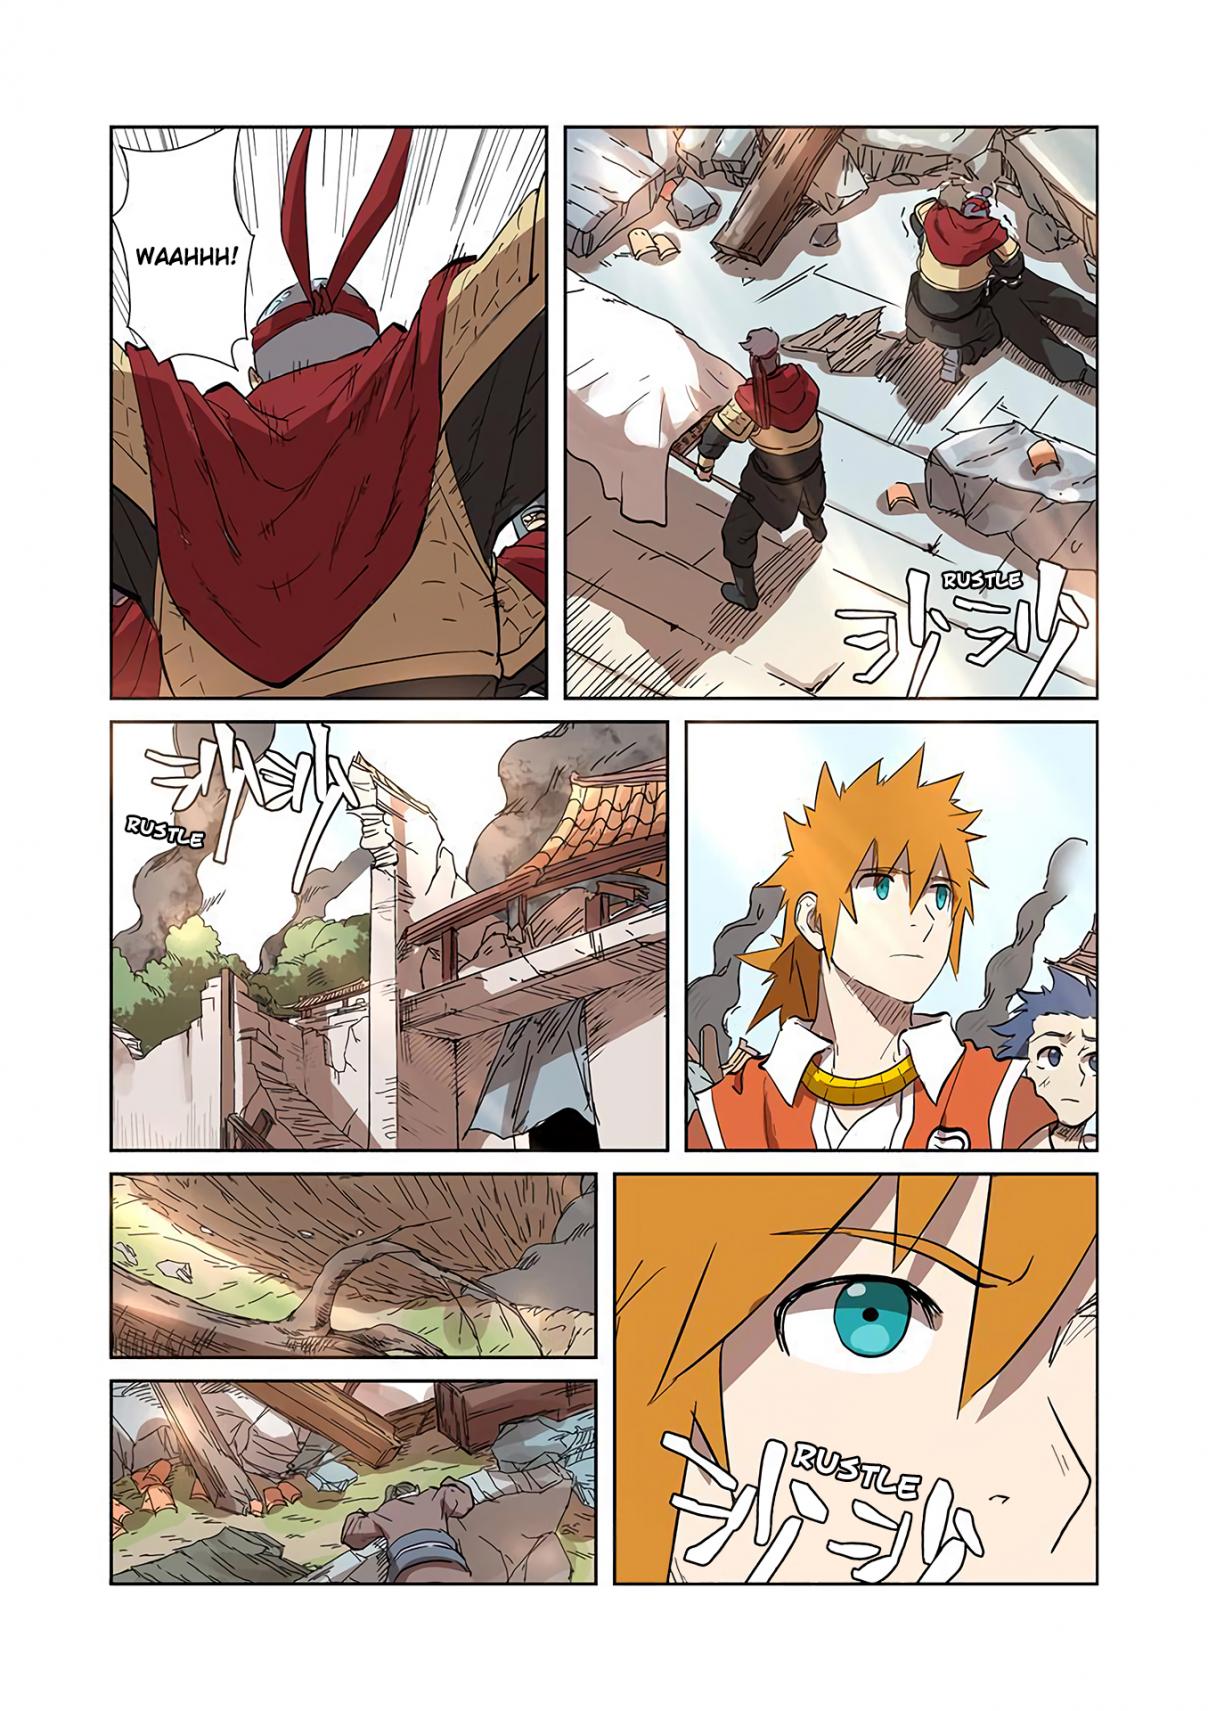 Tales of Demons and Gods Ch. 186.5